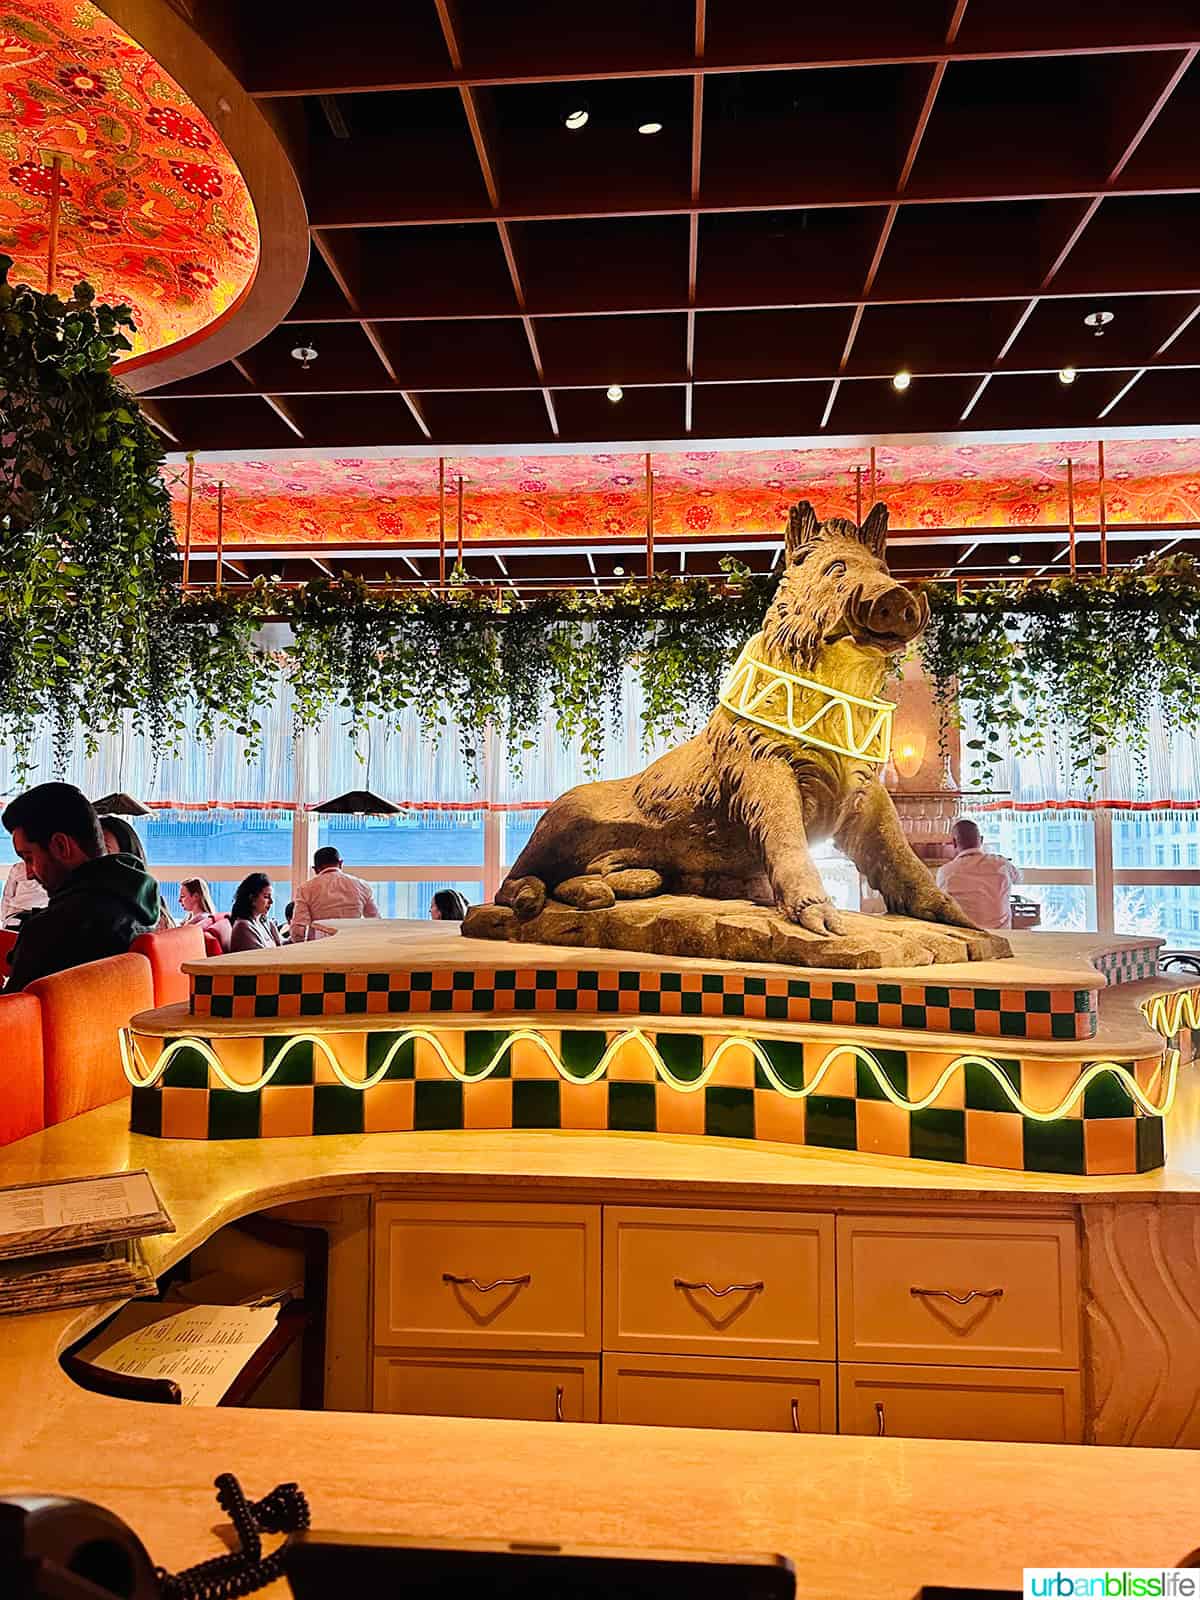 large dog sculpture in Bad Roman restaurant in New York City.